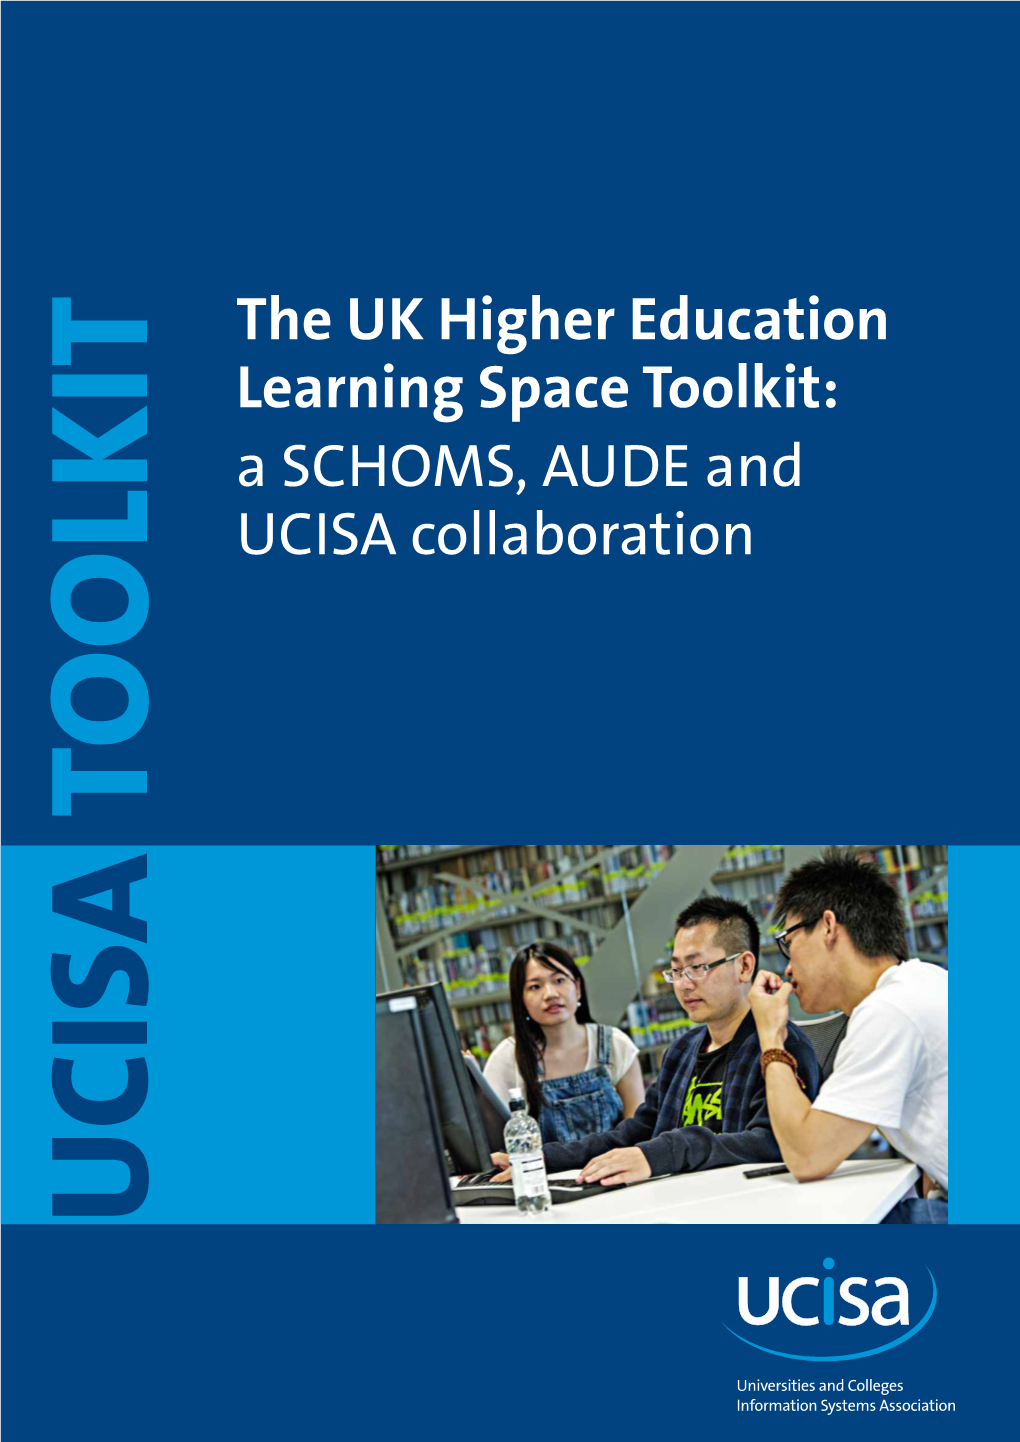 IT the UK Higher Education Learning Space Toolkit